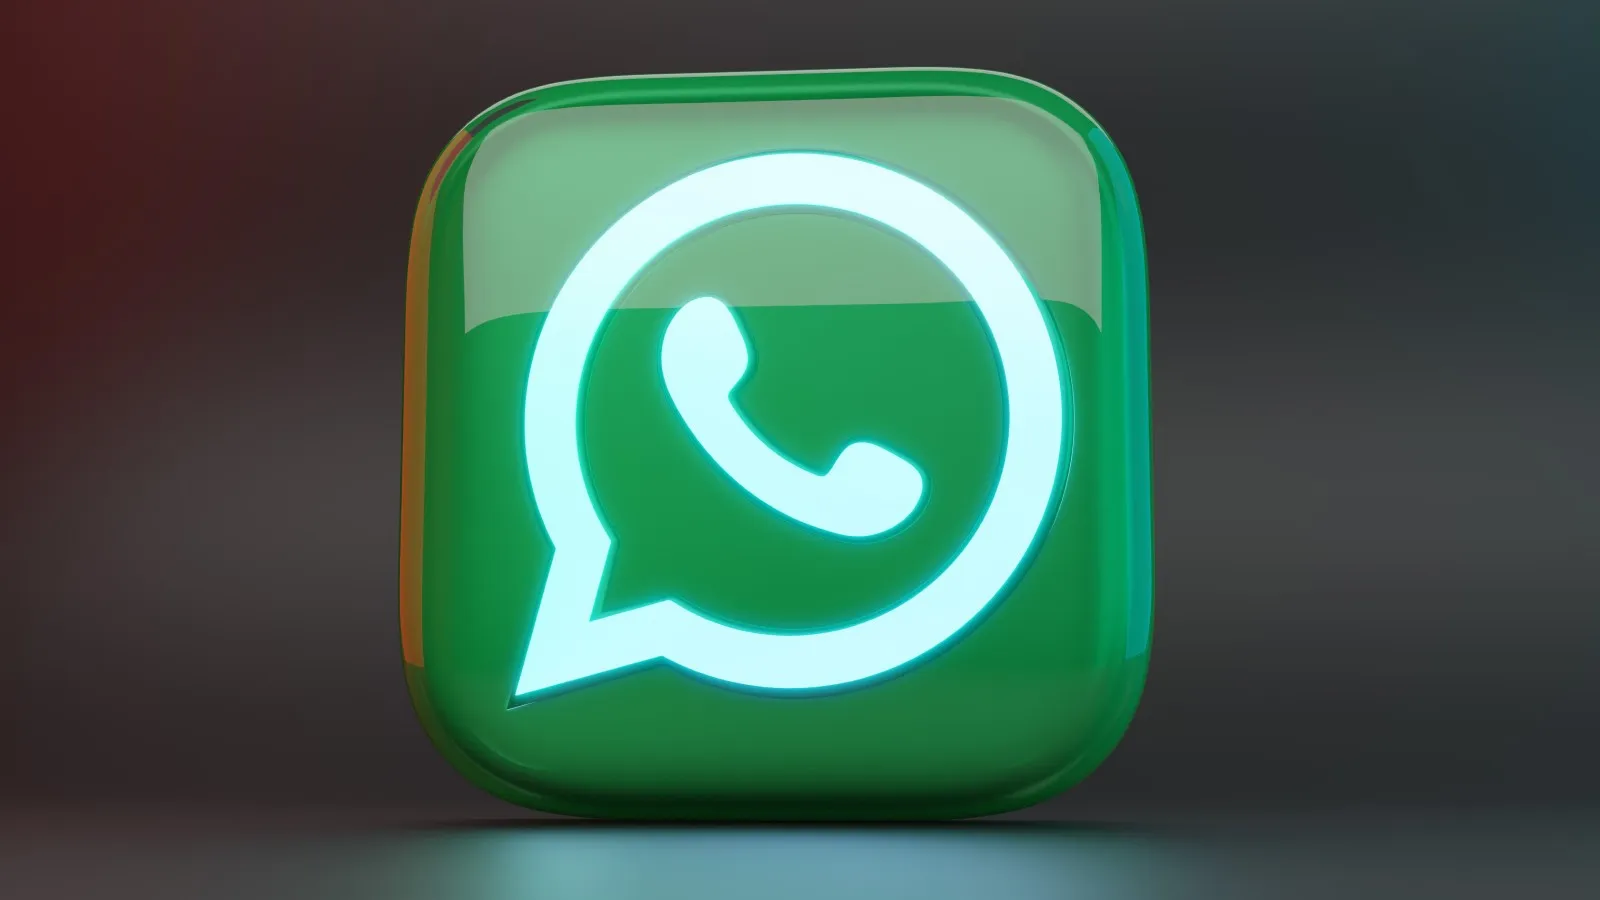 When I'm calling someone on WhatsApp and it shows unavailable, what does  that mean? Why does it happen? - Quora